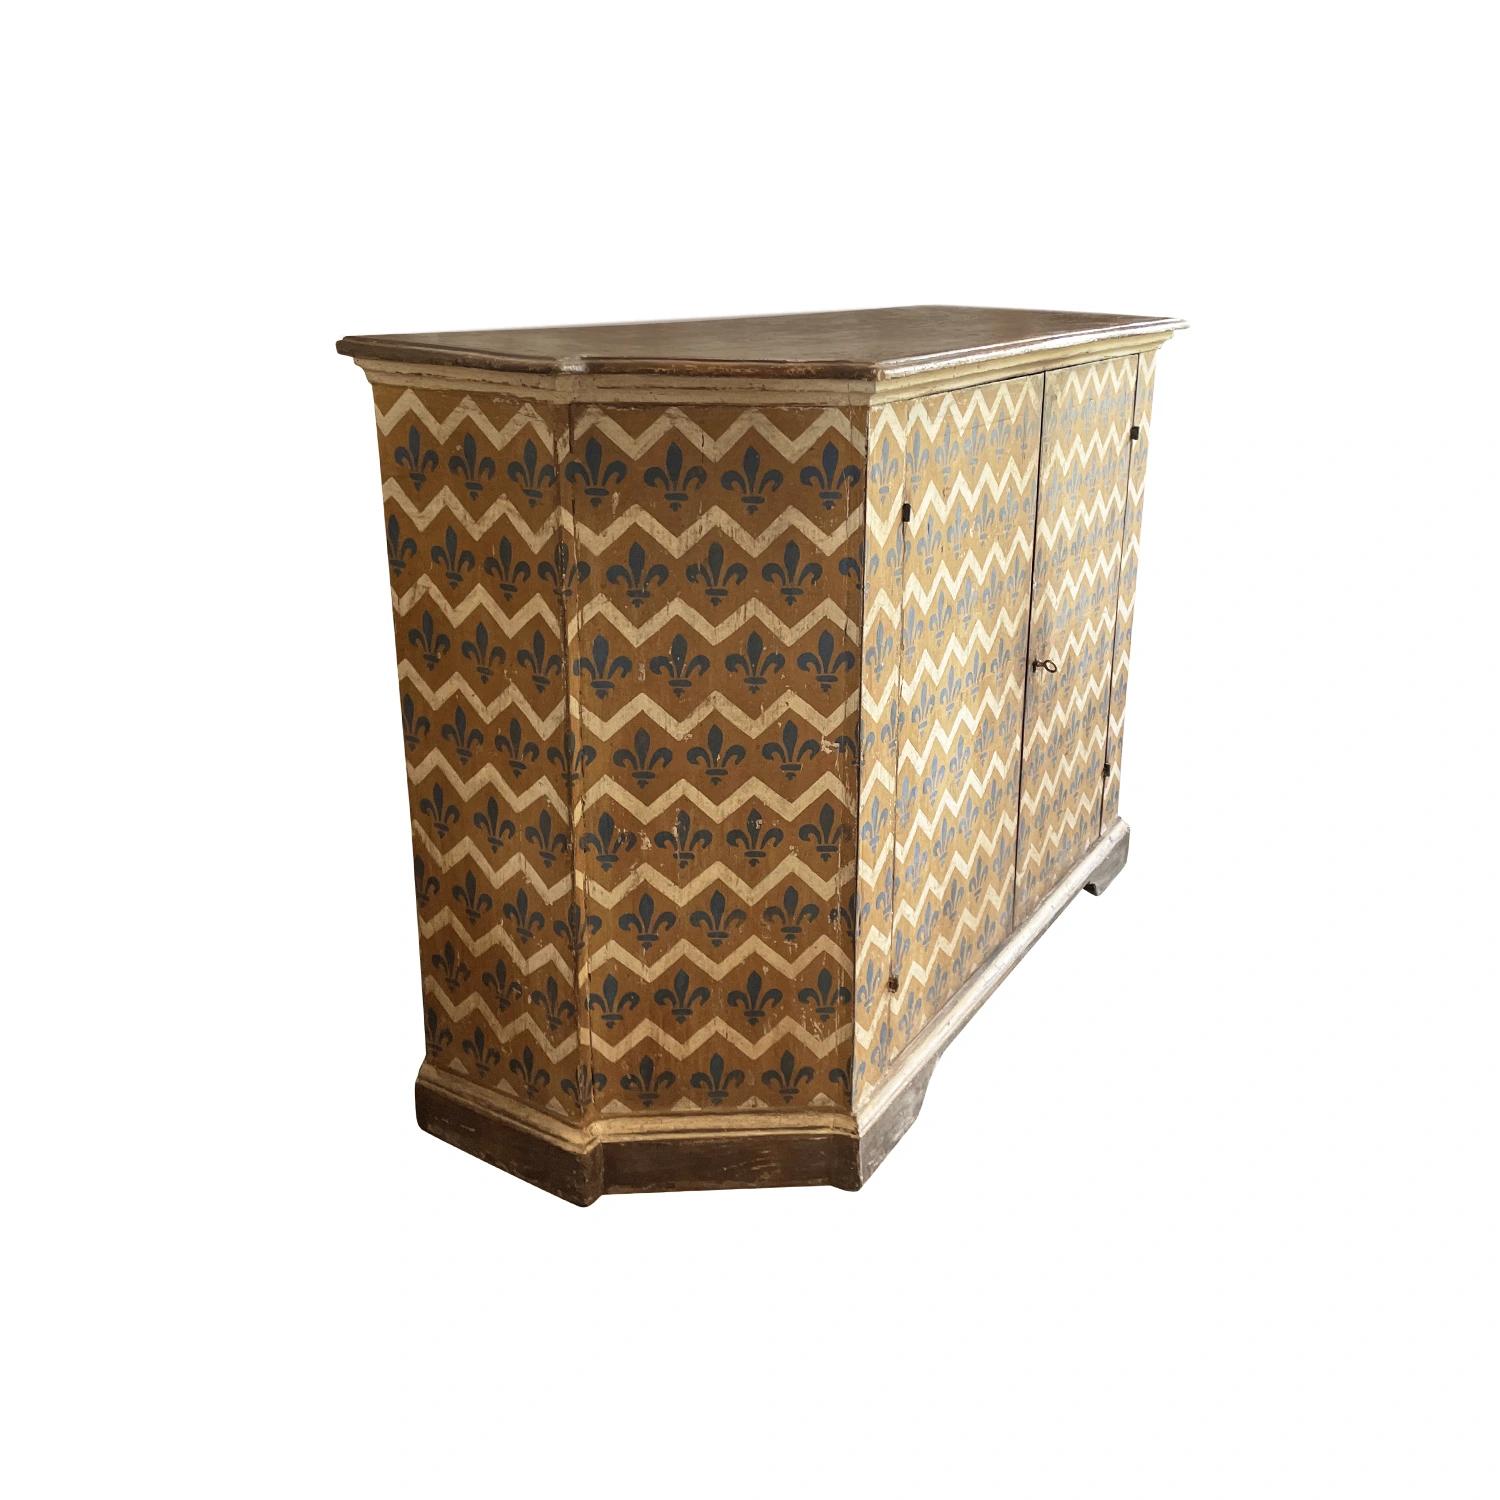 A mid 19th Century Italian buffet in a very interesting geometrical pattern with continuous blue Fleur de Lys and ecru colored zigzag pattern on a golden Sienna colored background. The patinated Florentine commode has a slightly raised rectangular